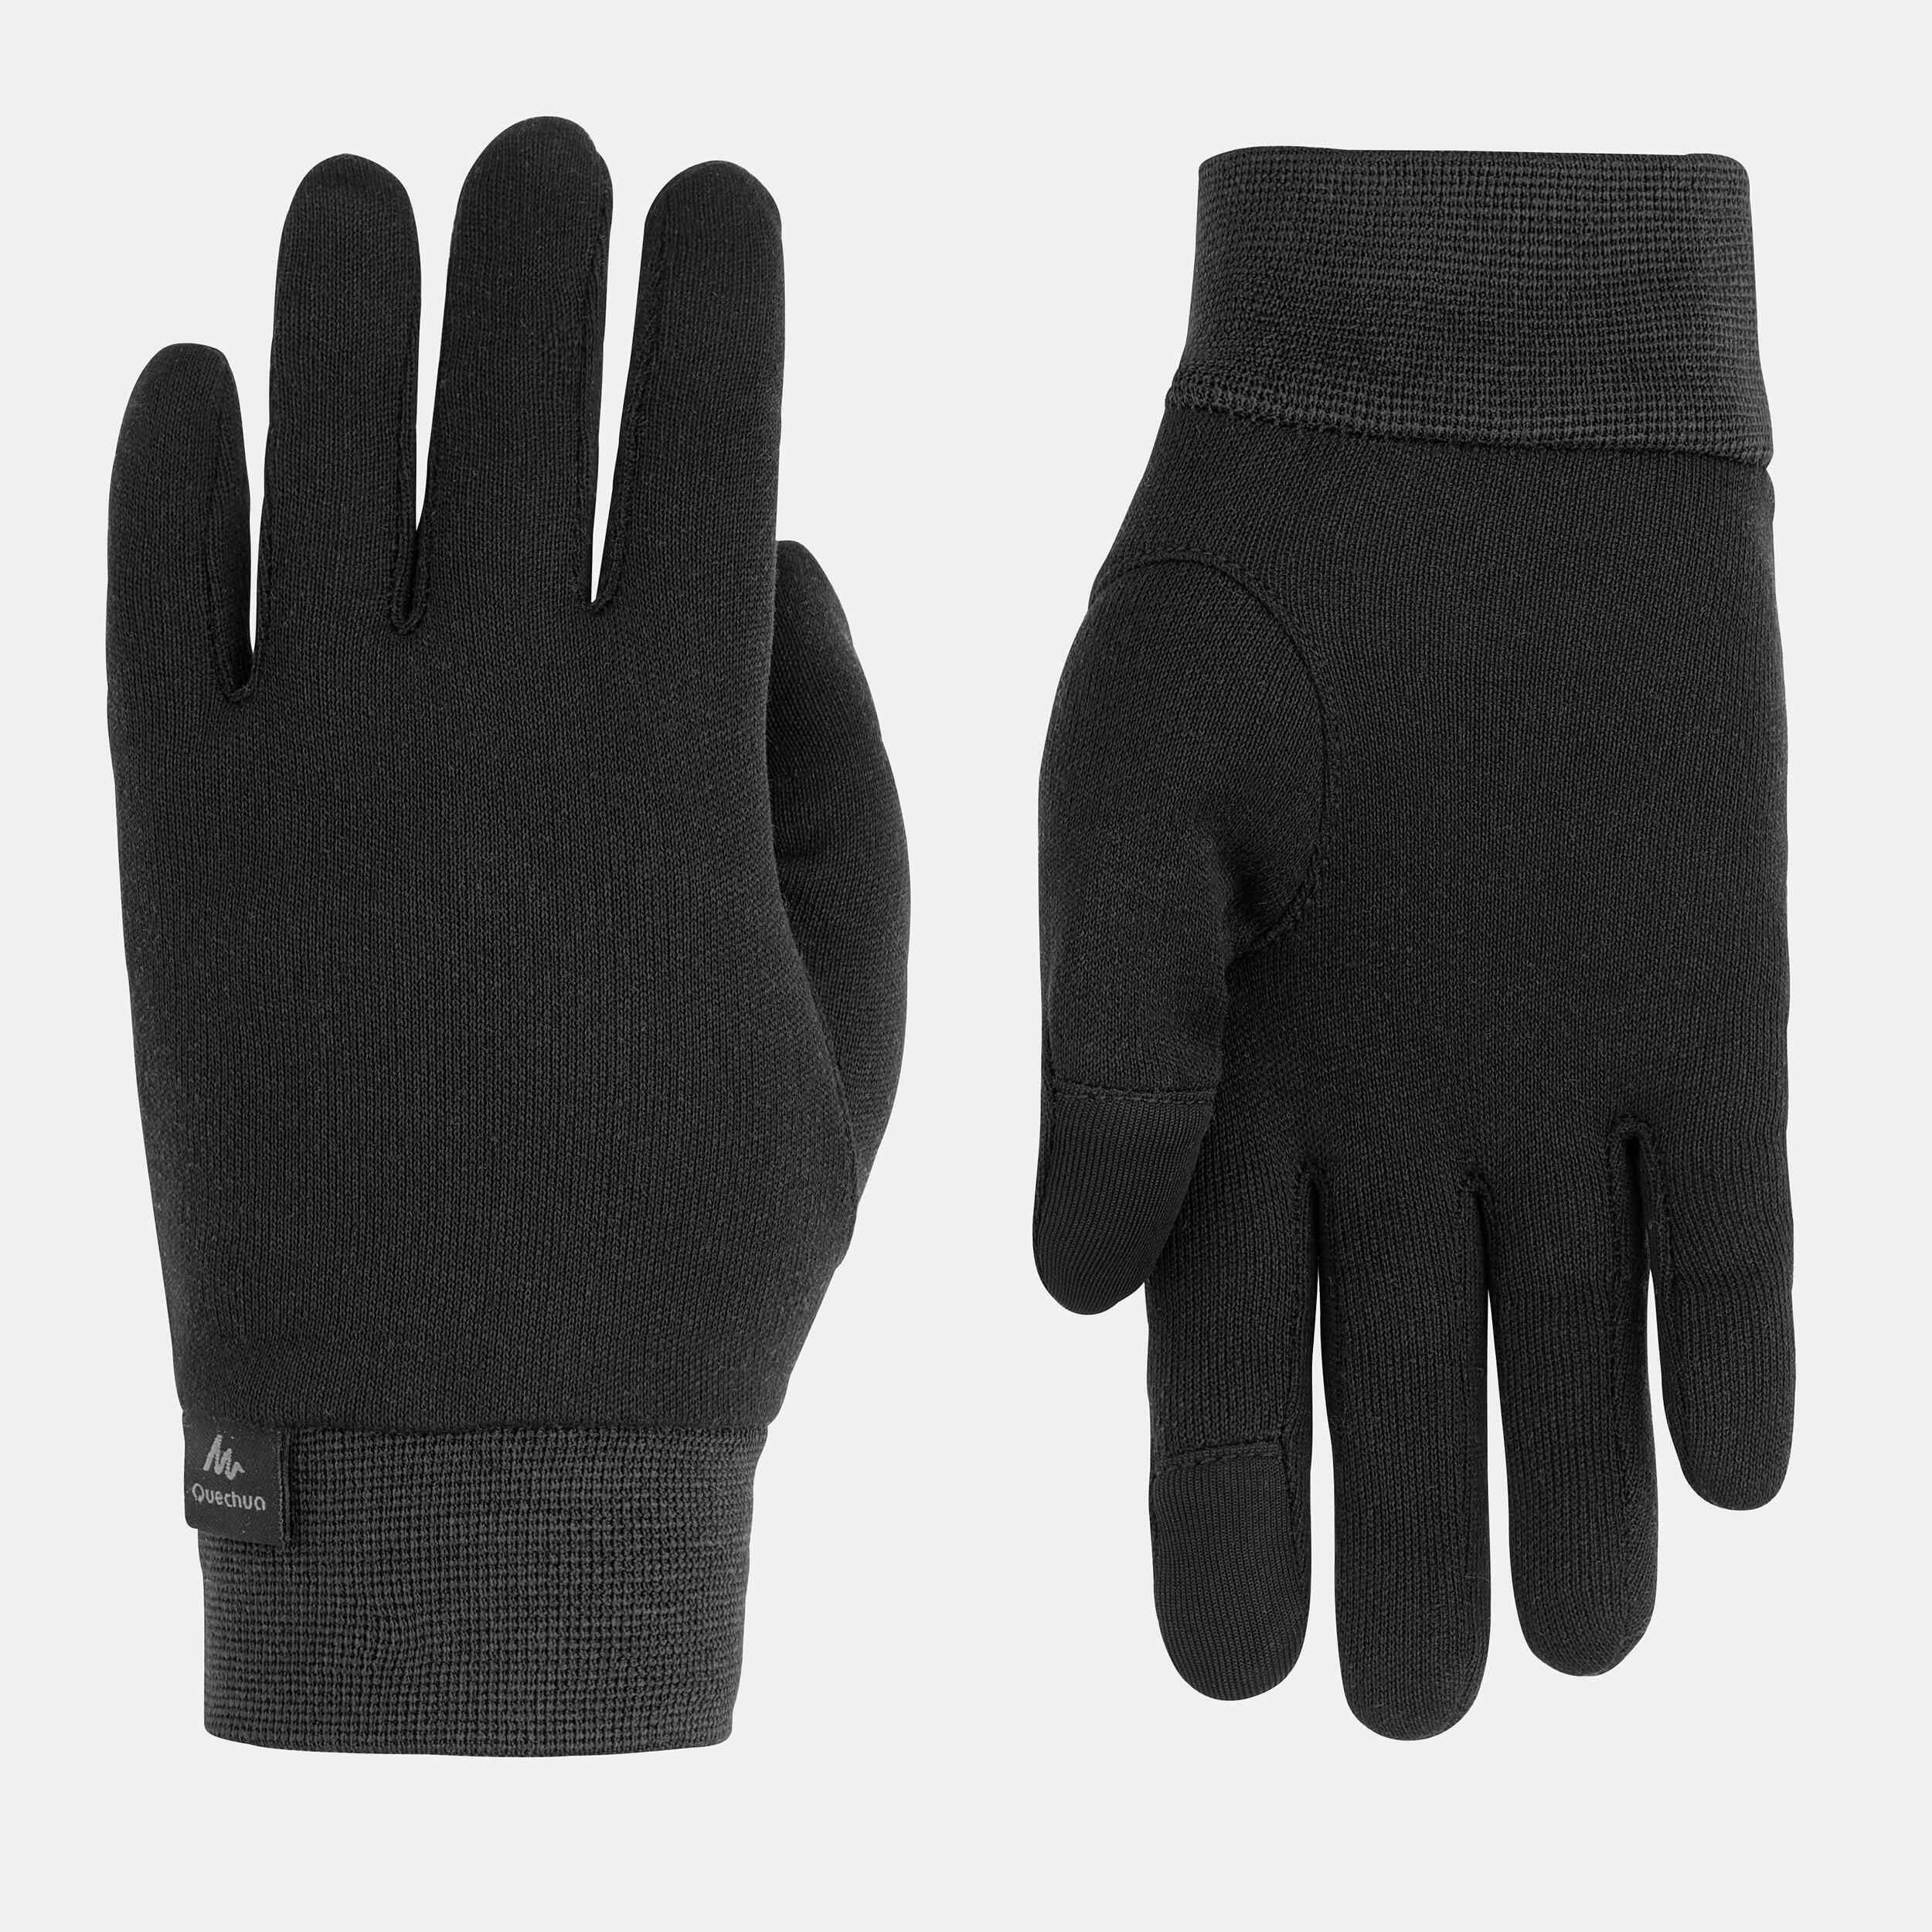 KIDS’ HIKING TOUCHSCREEN COMPATIBLE GLOVES - SH500 MOUNTAIN SILK - AGE 6-14  6/6